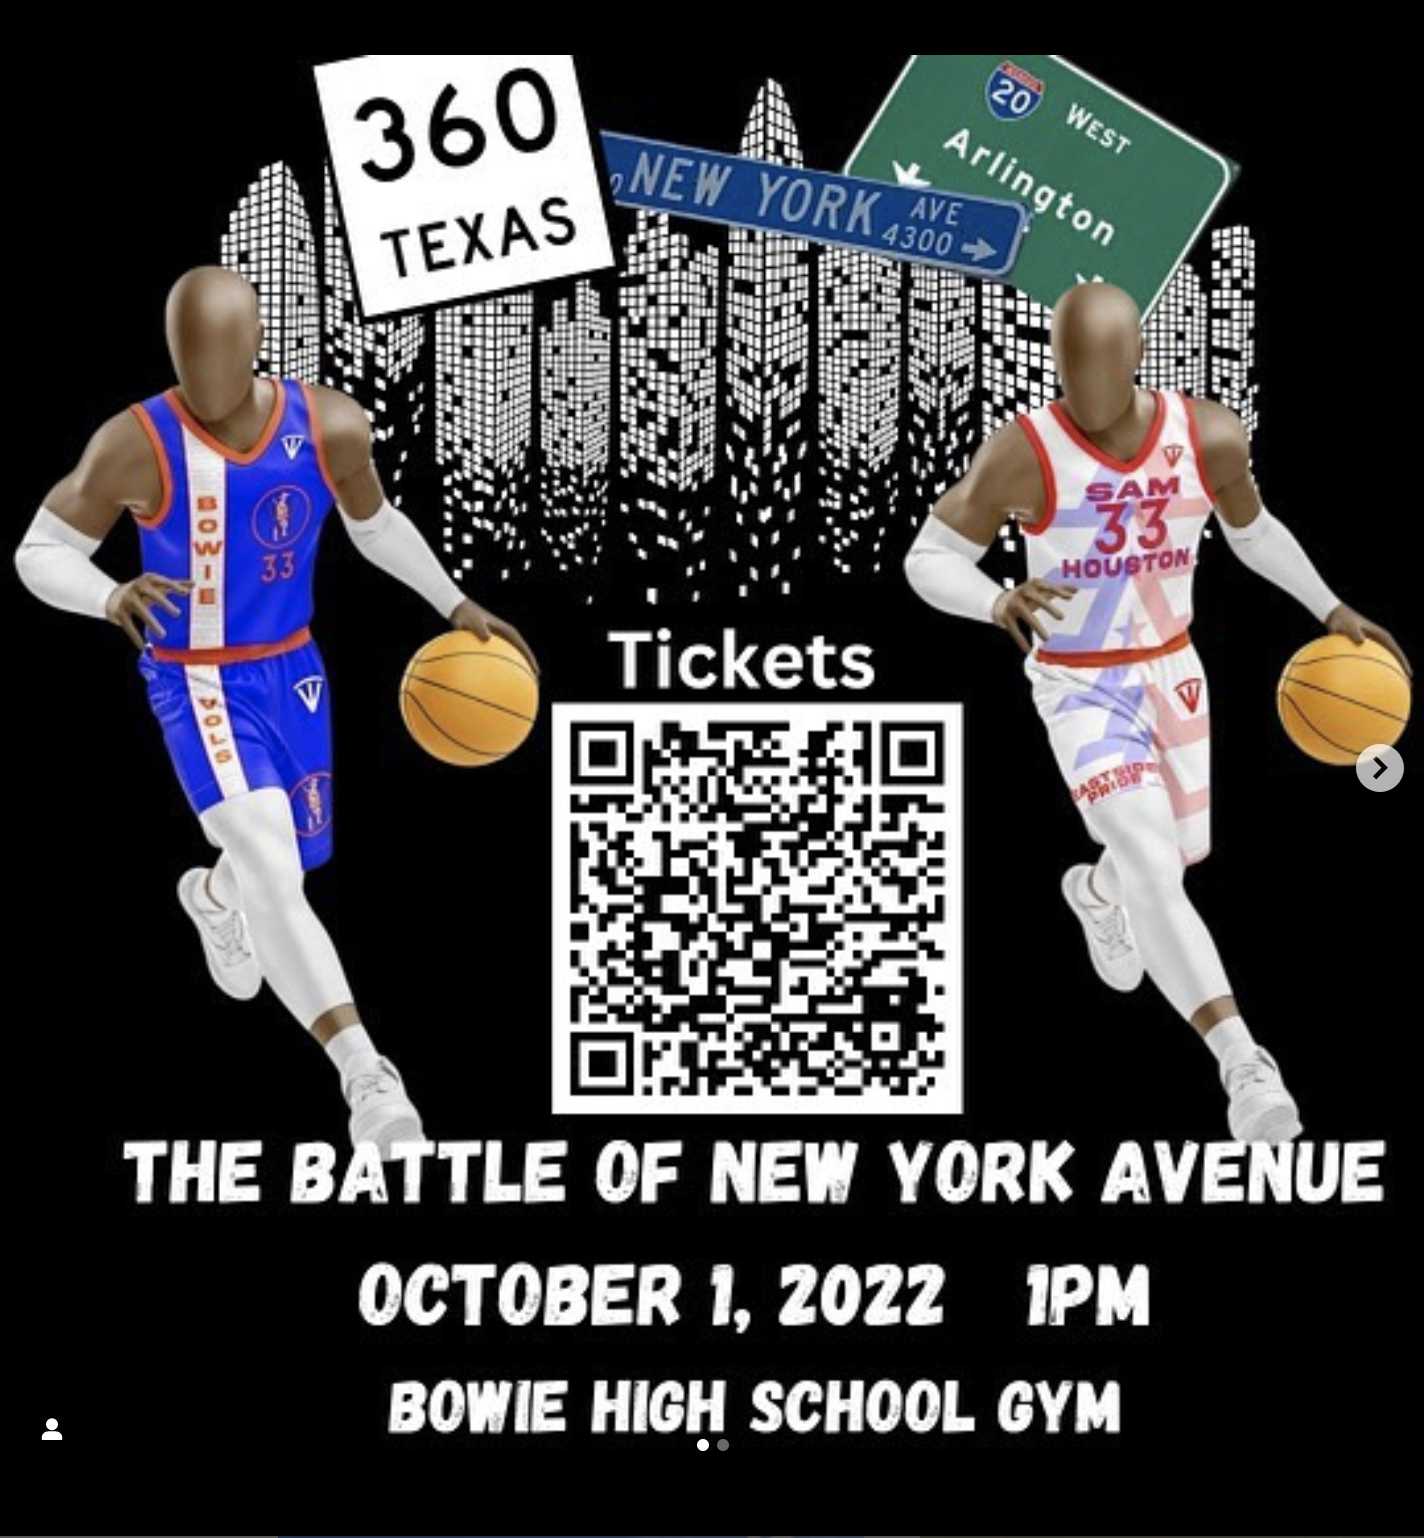 The Battle Of New York Ave Arl Bowie High vs Sam Houston High on oct. 01, 13:00@Bowie High School Gym - Buy tickets and Get information on METROPLEX ALUMNI GAMES 